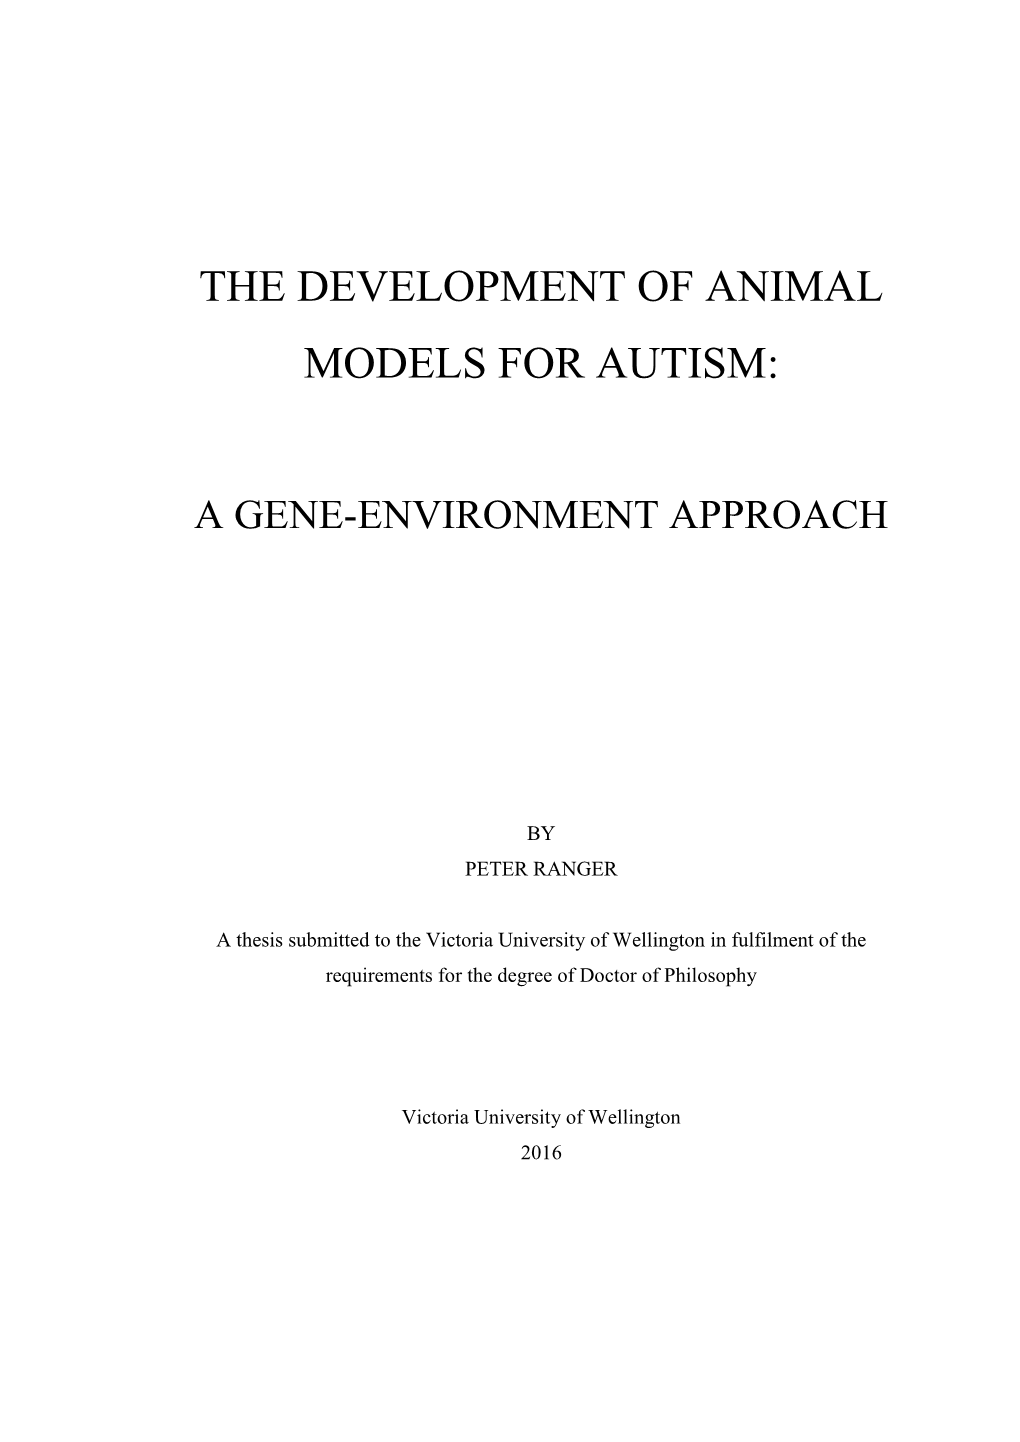 The Development of Animal Models for Autism